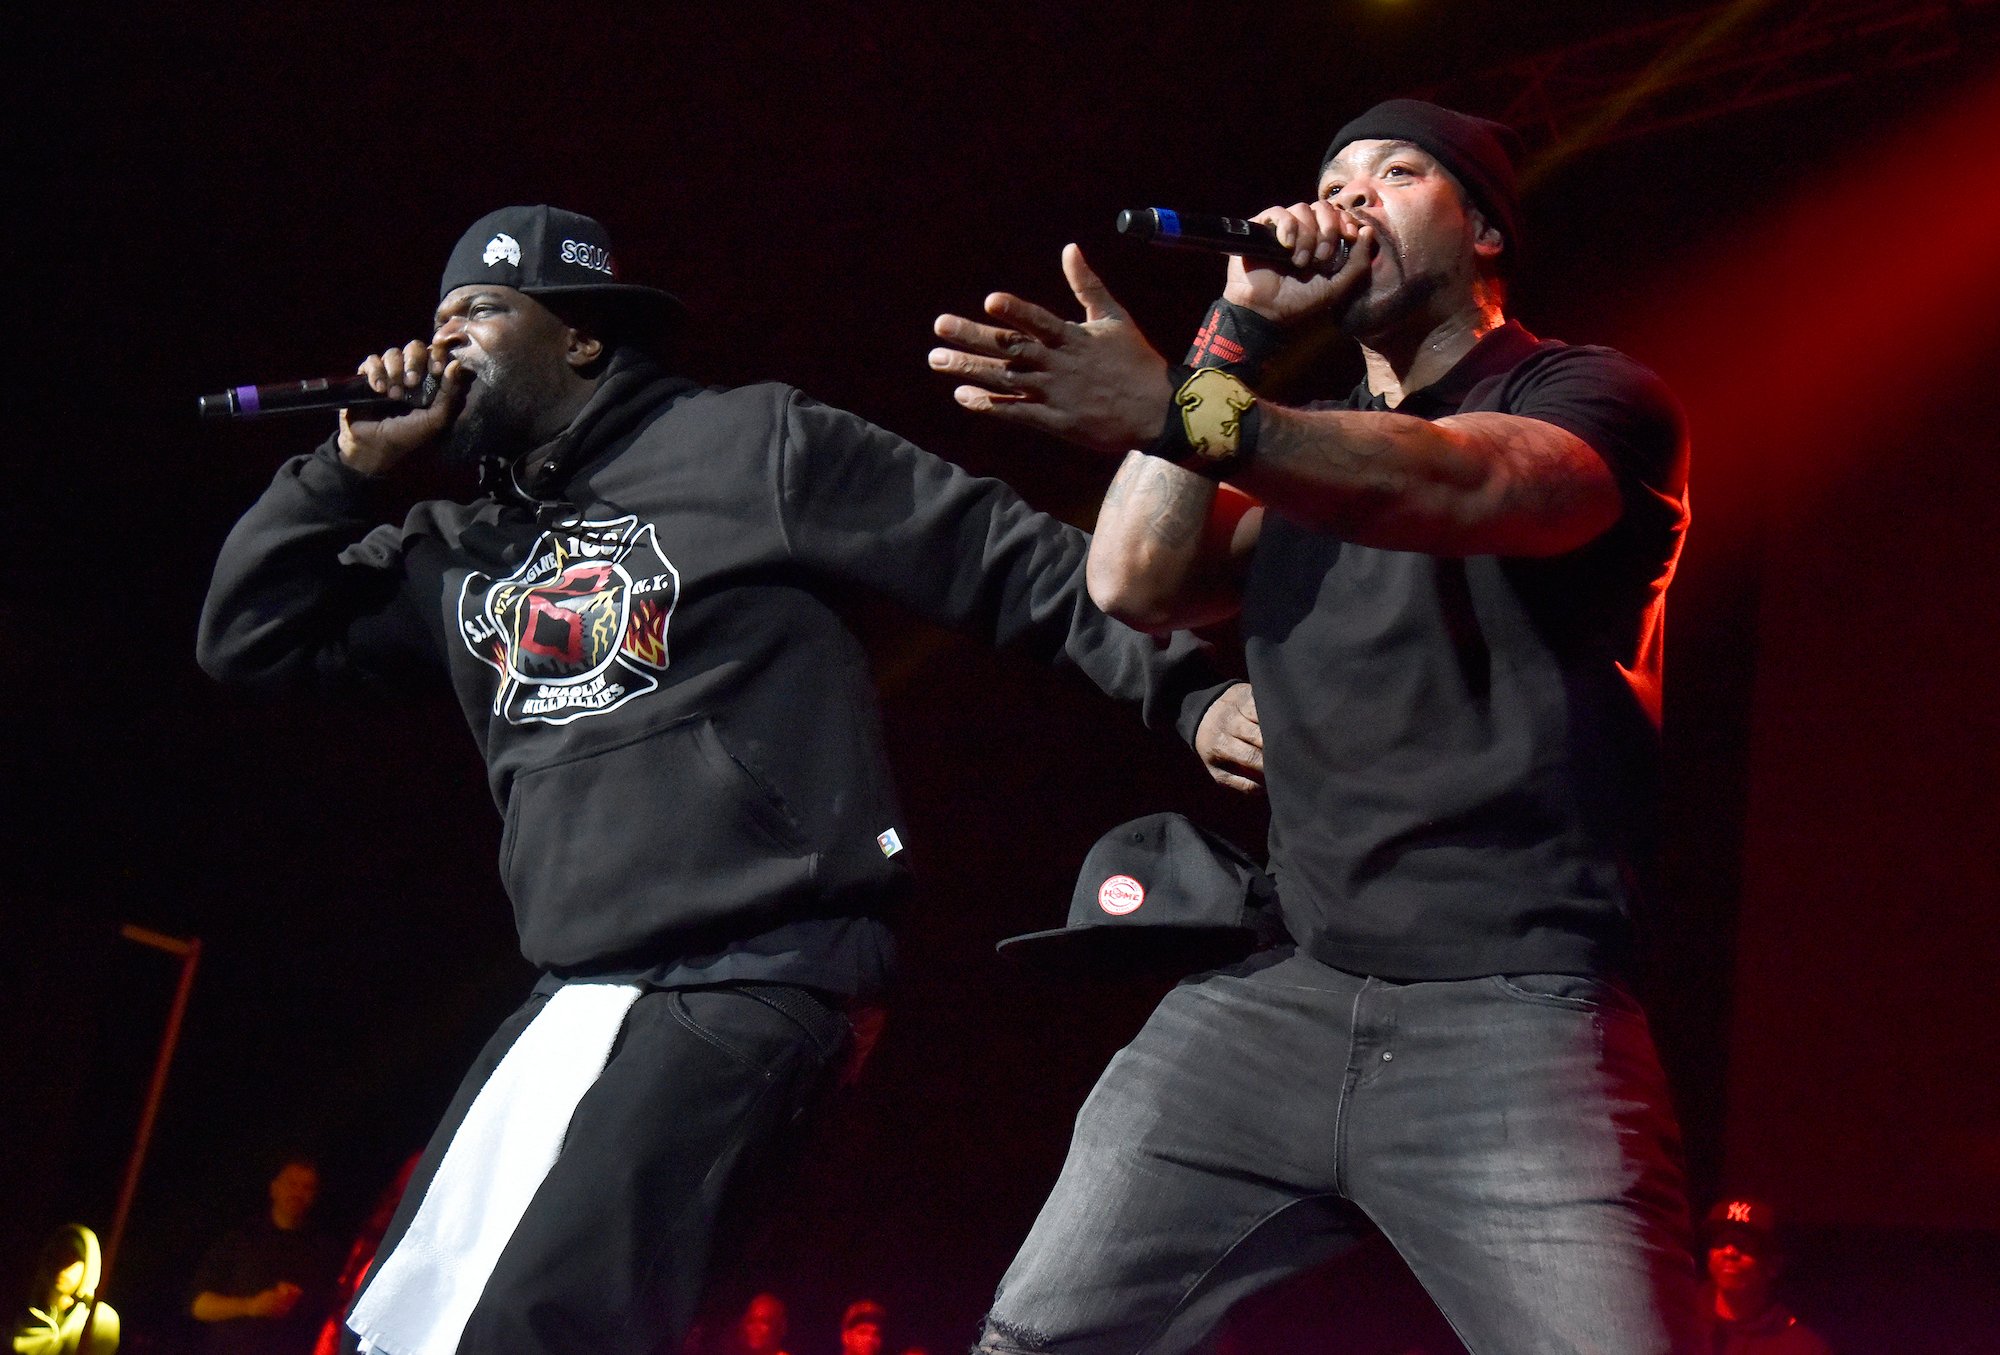 Cappadonna (L) and Method Man of Wu-Tang Clan performing together wearing black